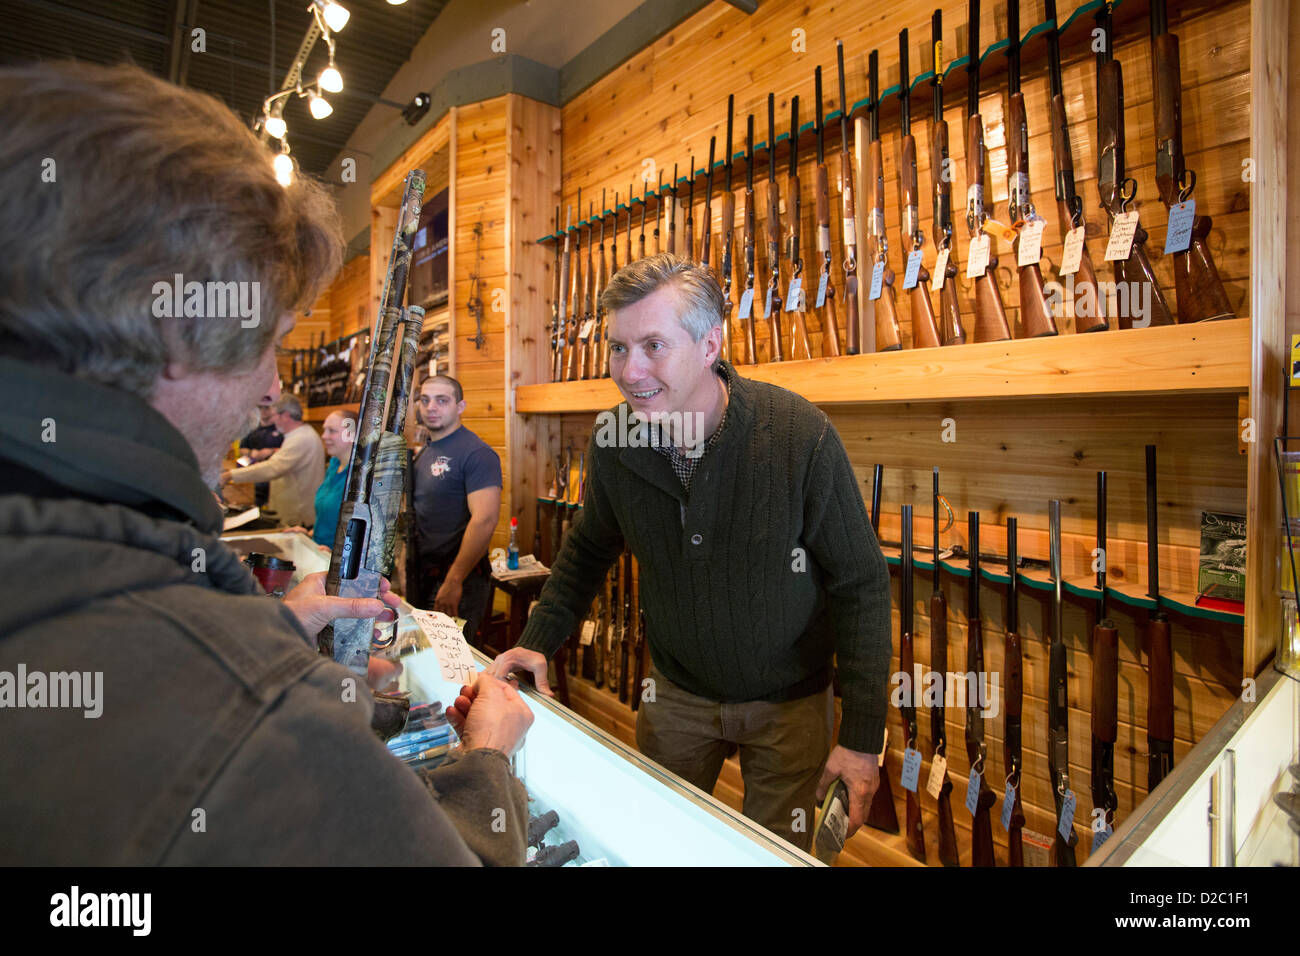 Milford, Michigan - Customers crowded the Huron Valley Guns store on Gun Appreciation Day. Pro-gun groups gathered at gun stores across the nation to buy weapons and to oppose proposed limits on gun ownership. Assault weapons at this store were in such short supply that customers had to enter a lottery for the right to buy one. Stock Photo